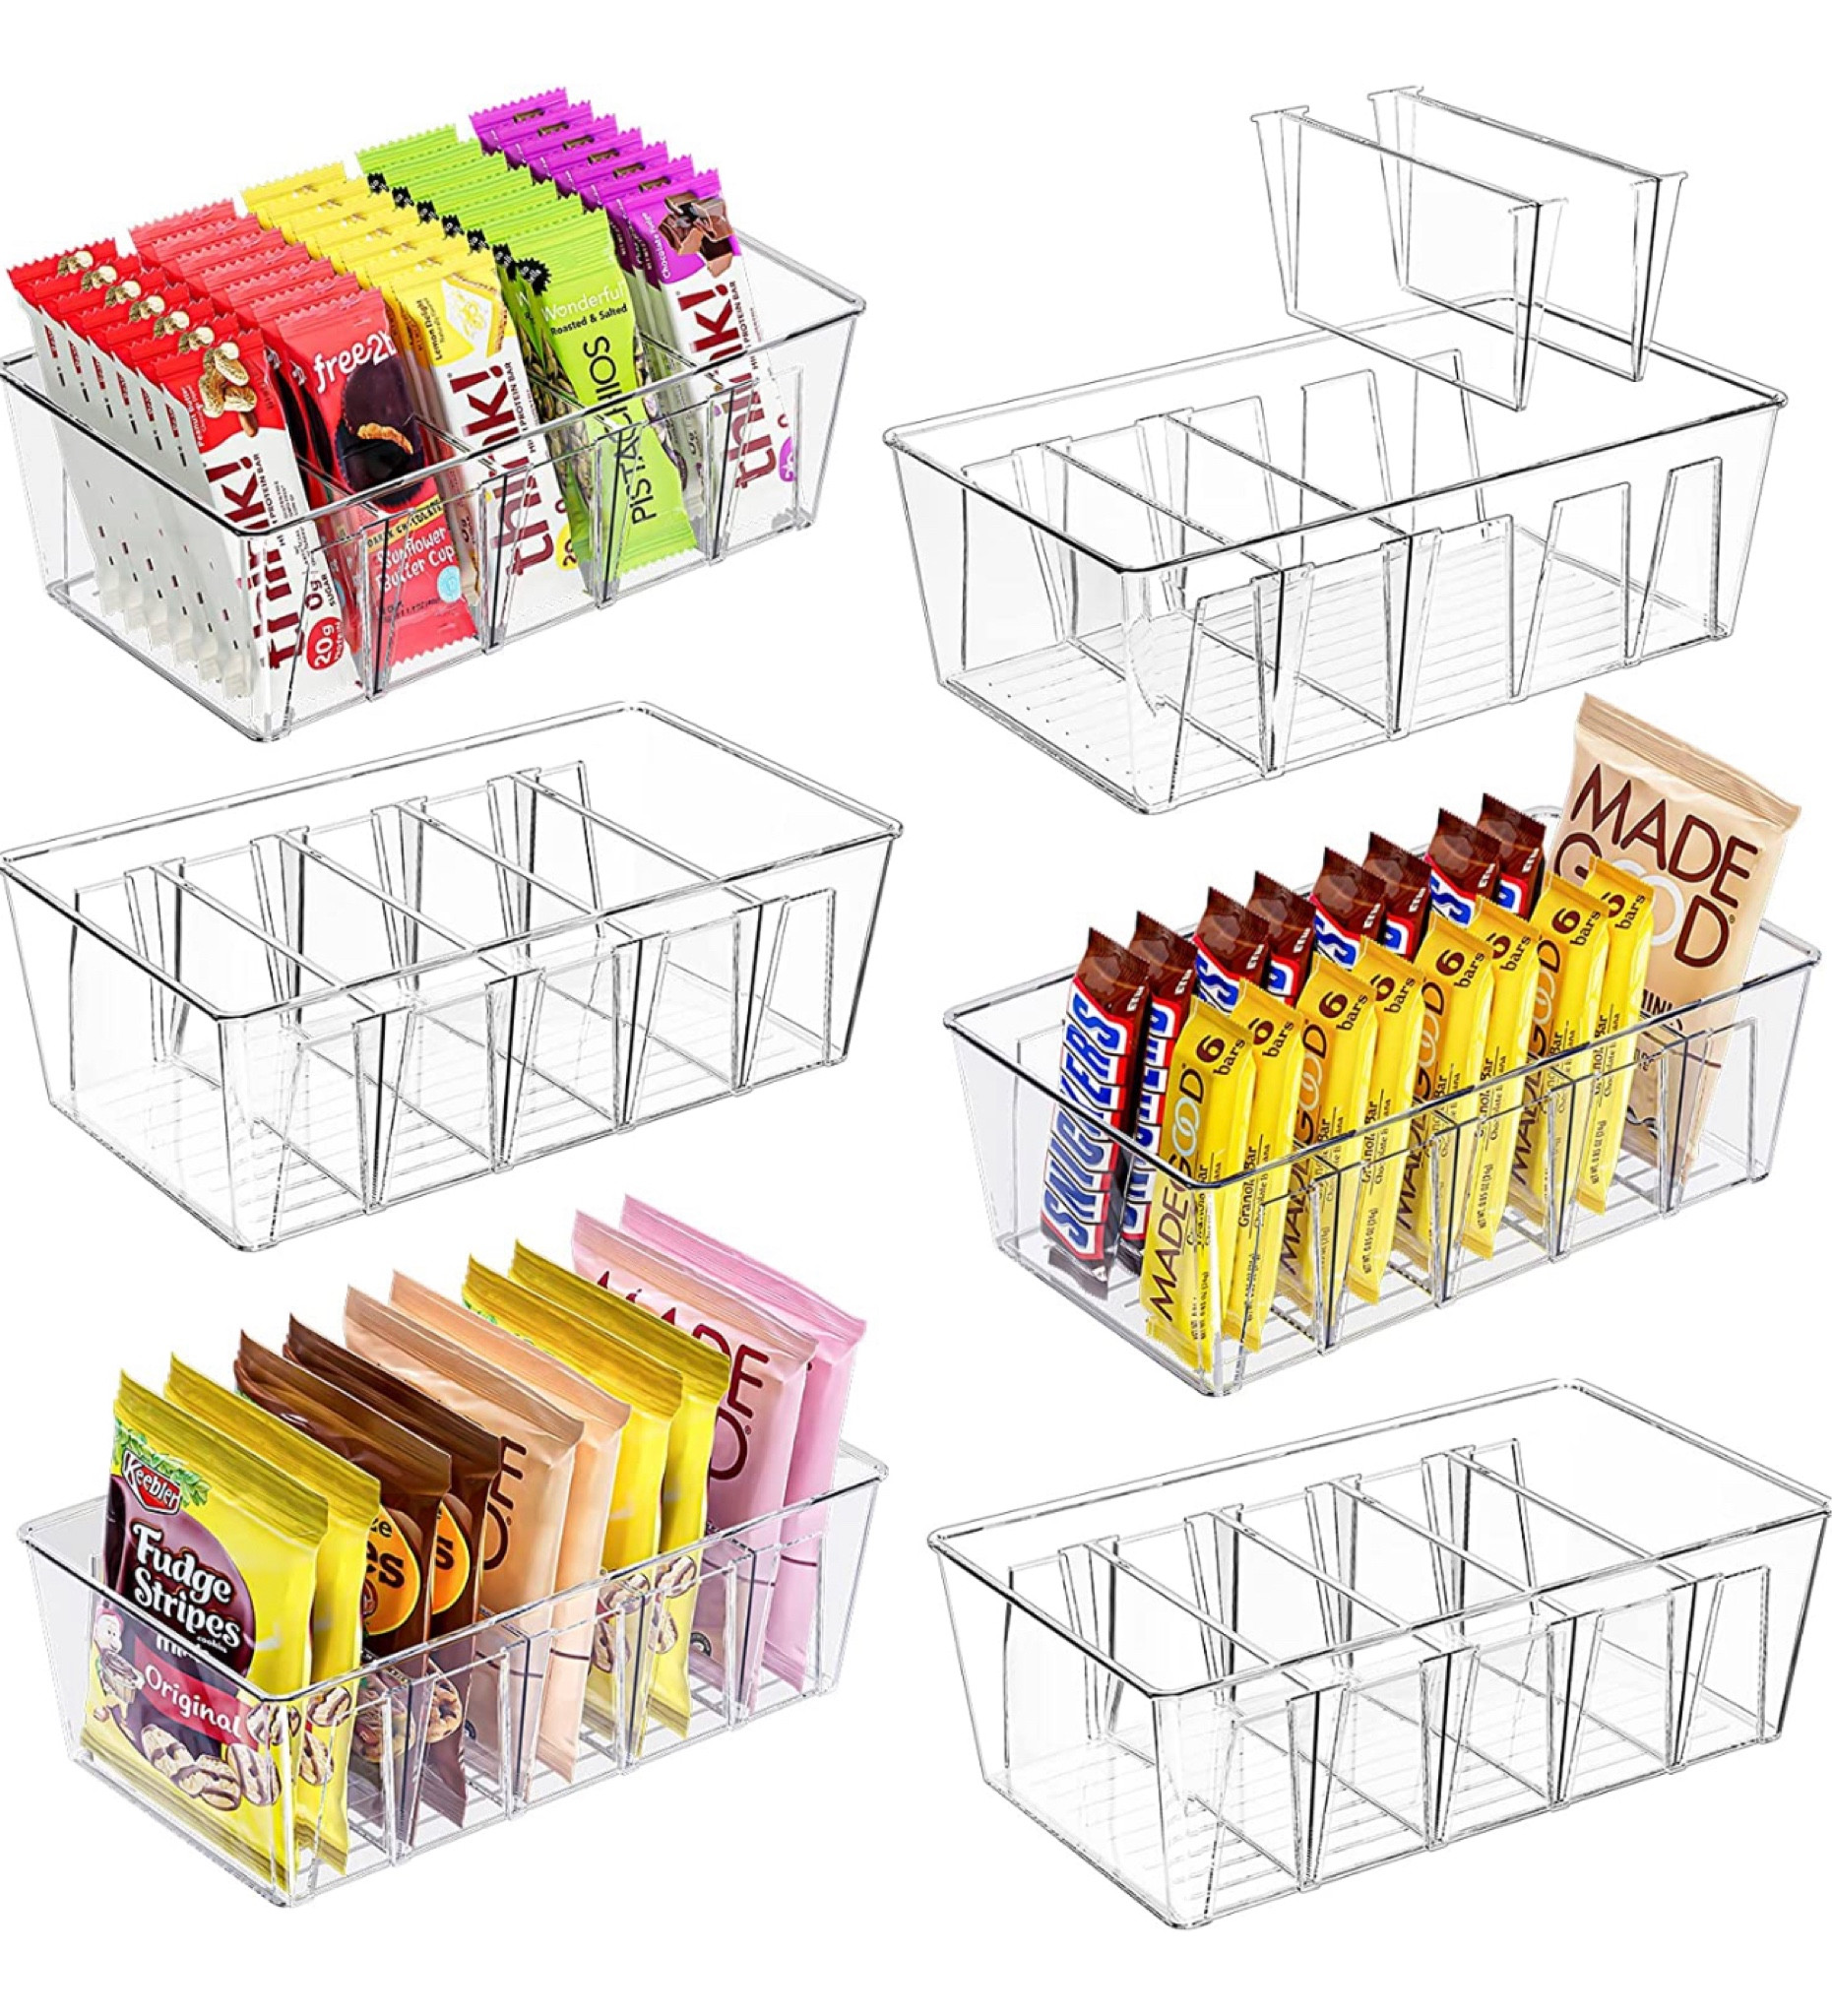 Pikanty - Stackable Shoe Organizer Bins | Made in USA (10)